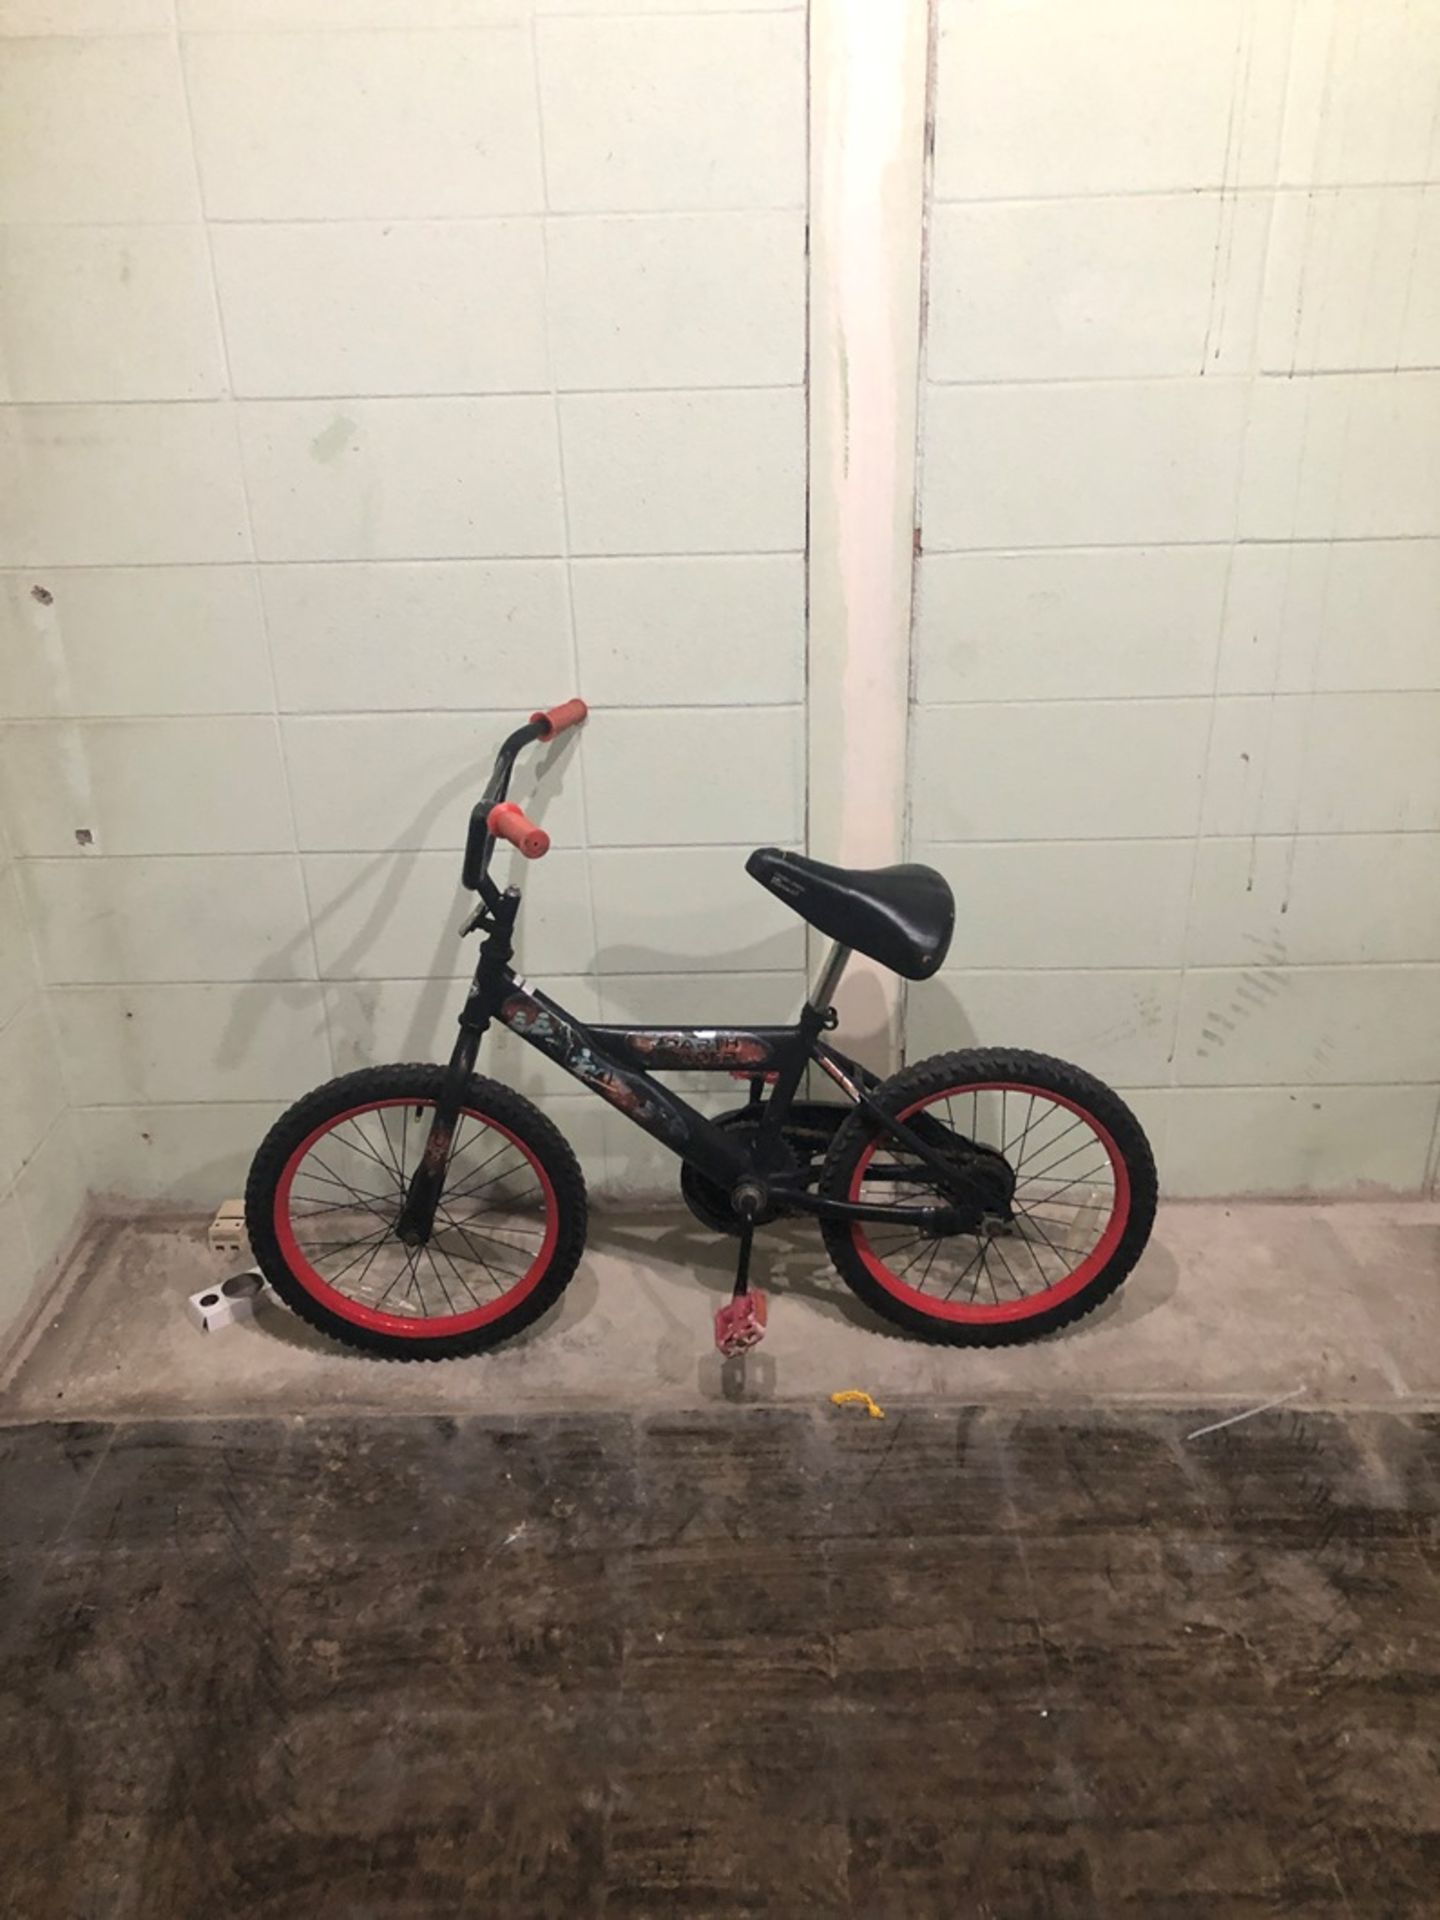 DARTH VADER VLK SIZE 18 inches BMX Speed 1 Tag # 324